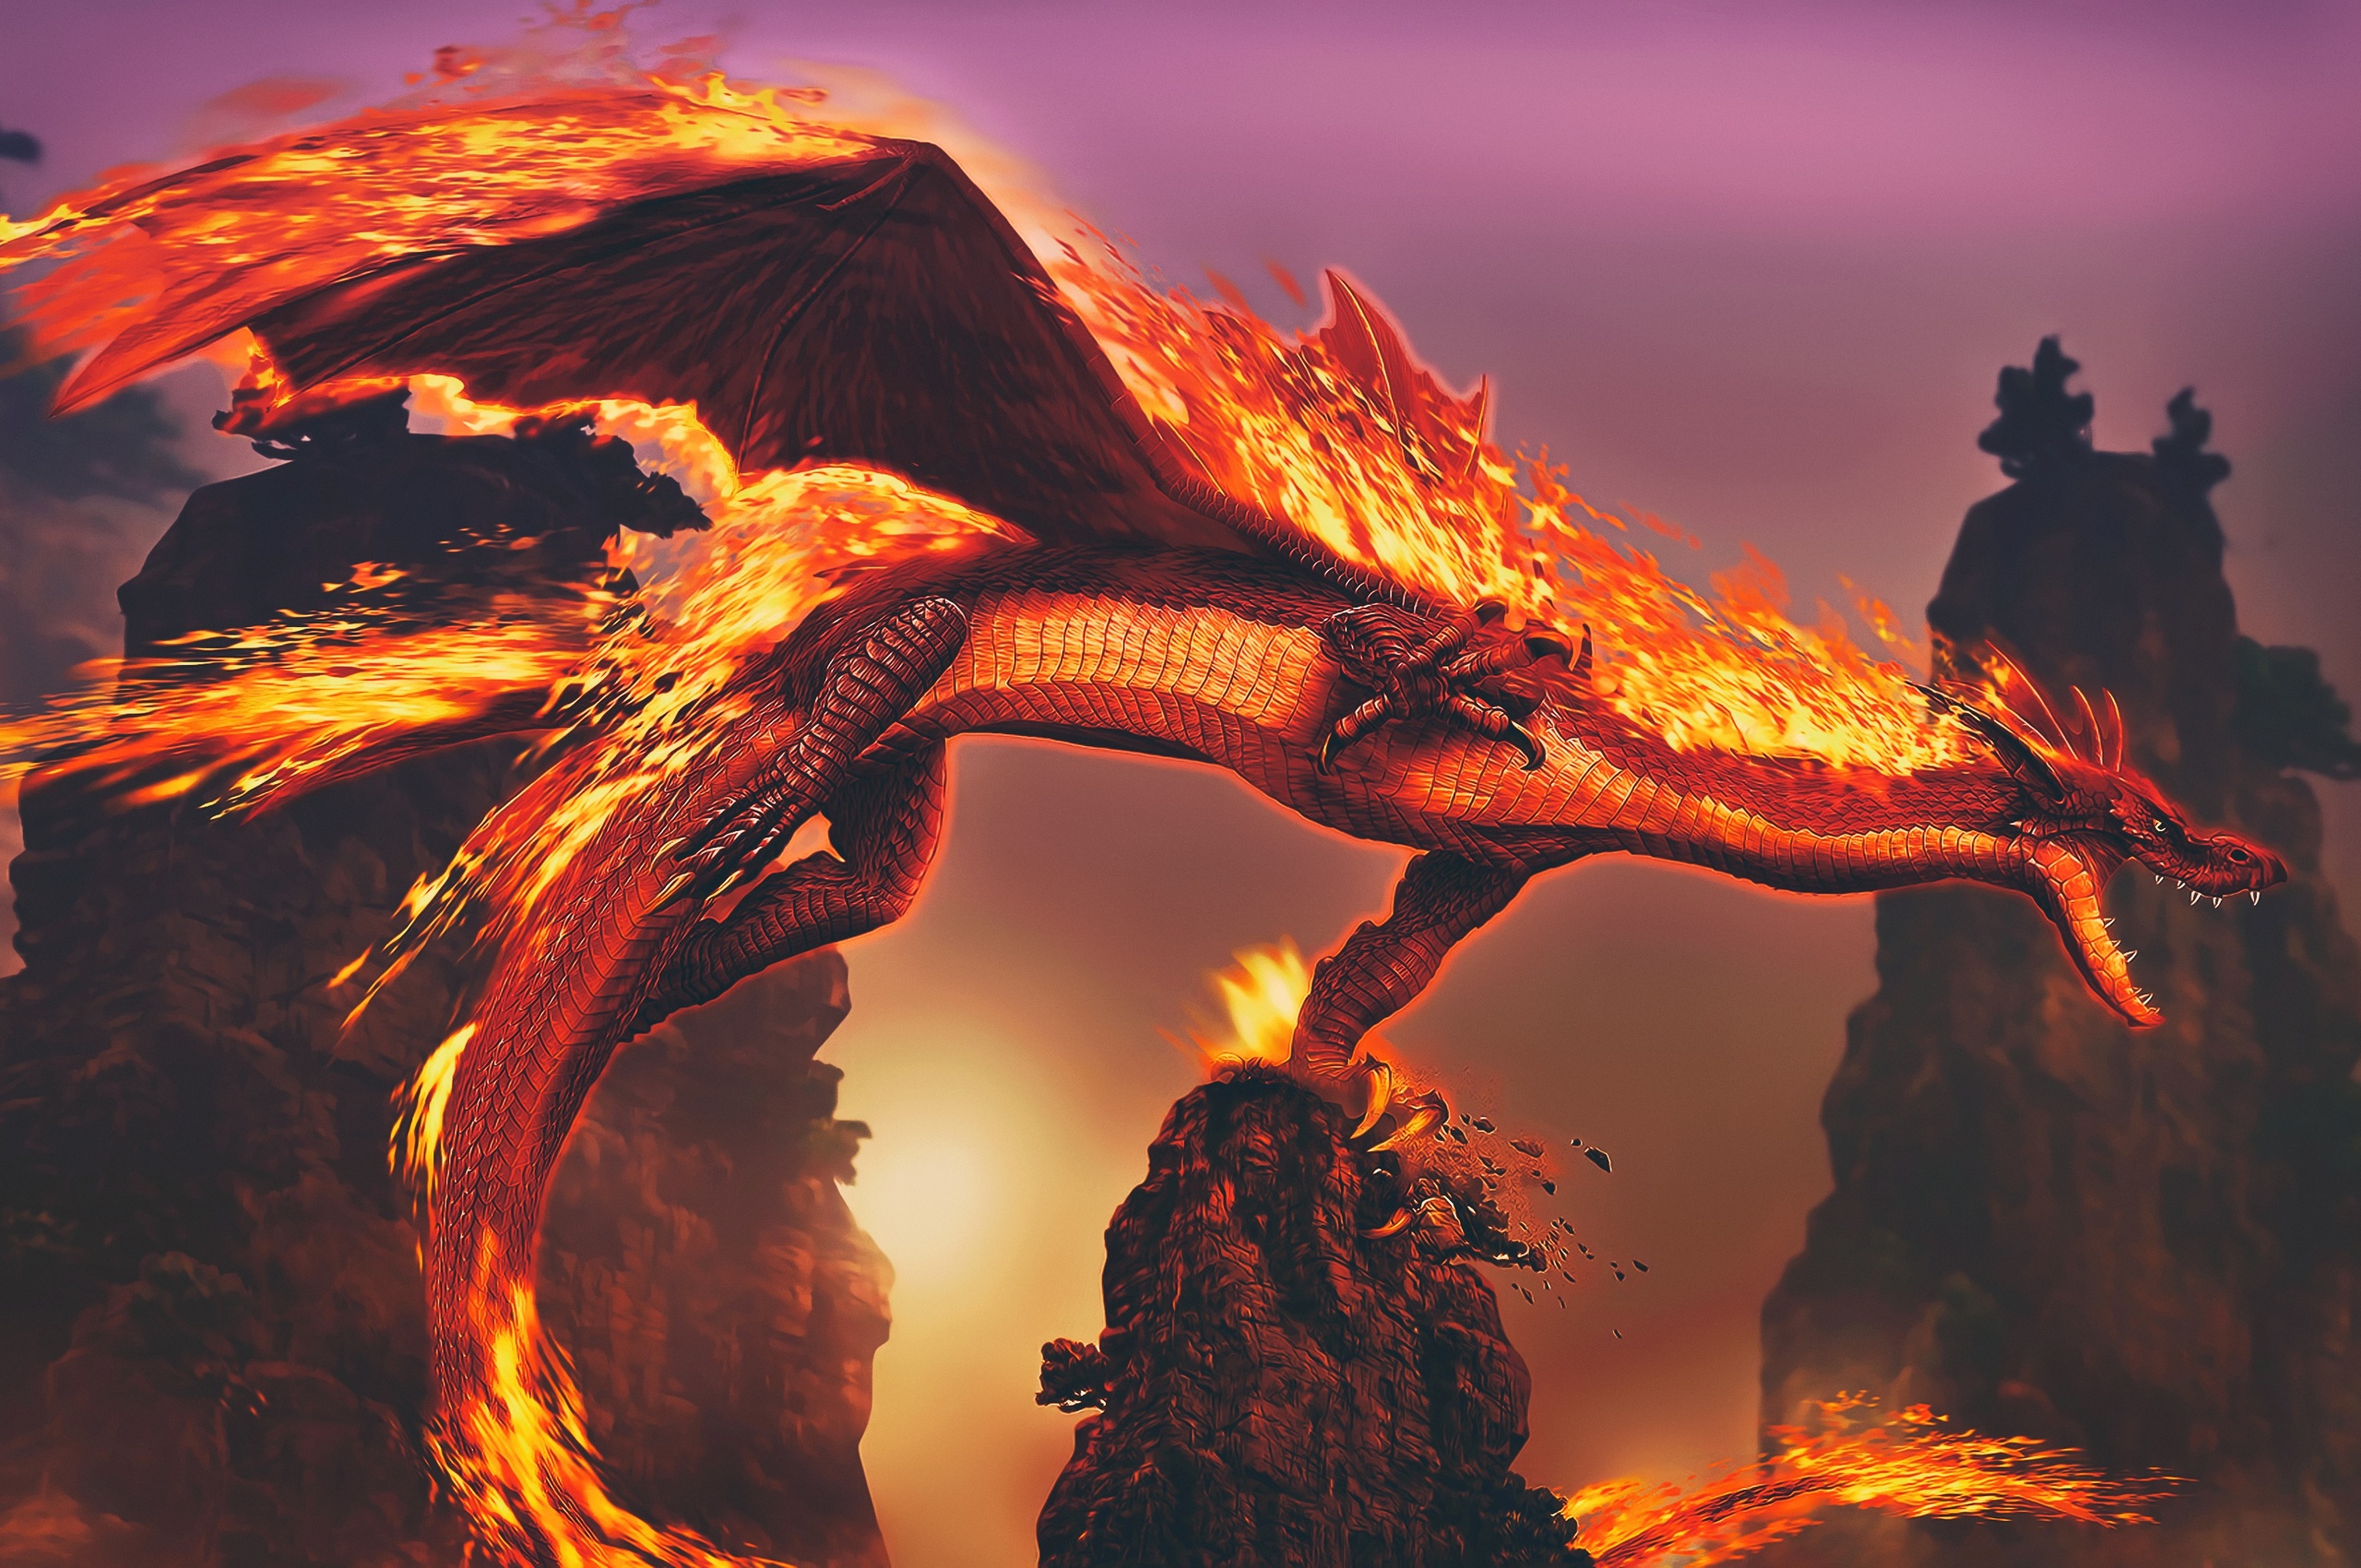 Cool Fire Dragon Wallpaper images